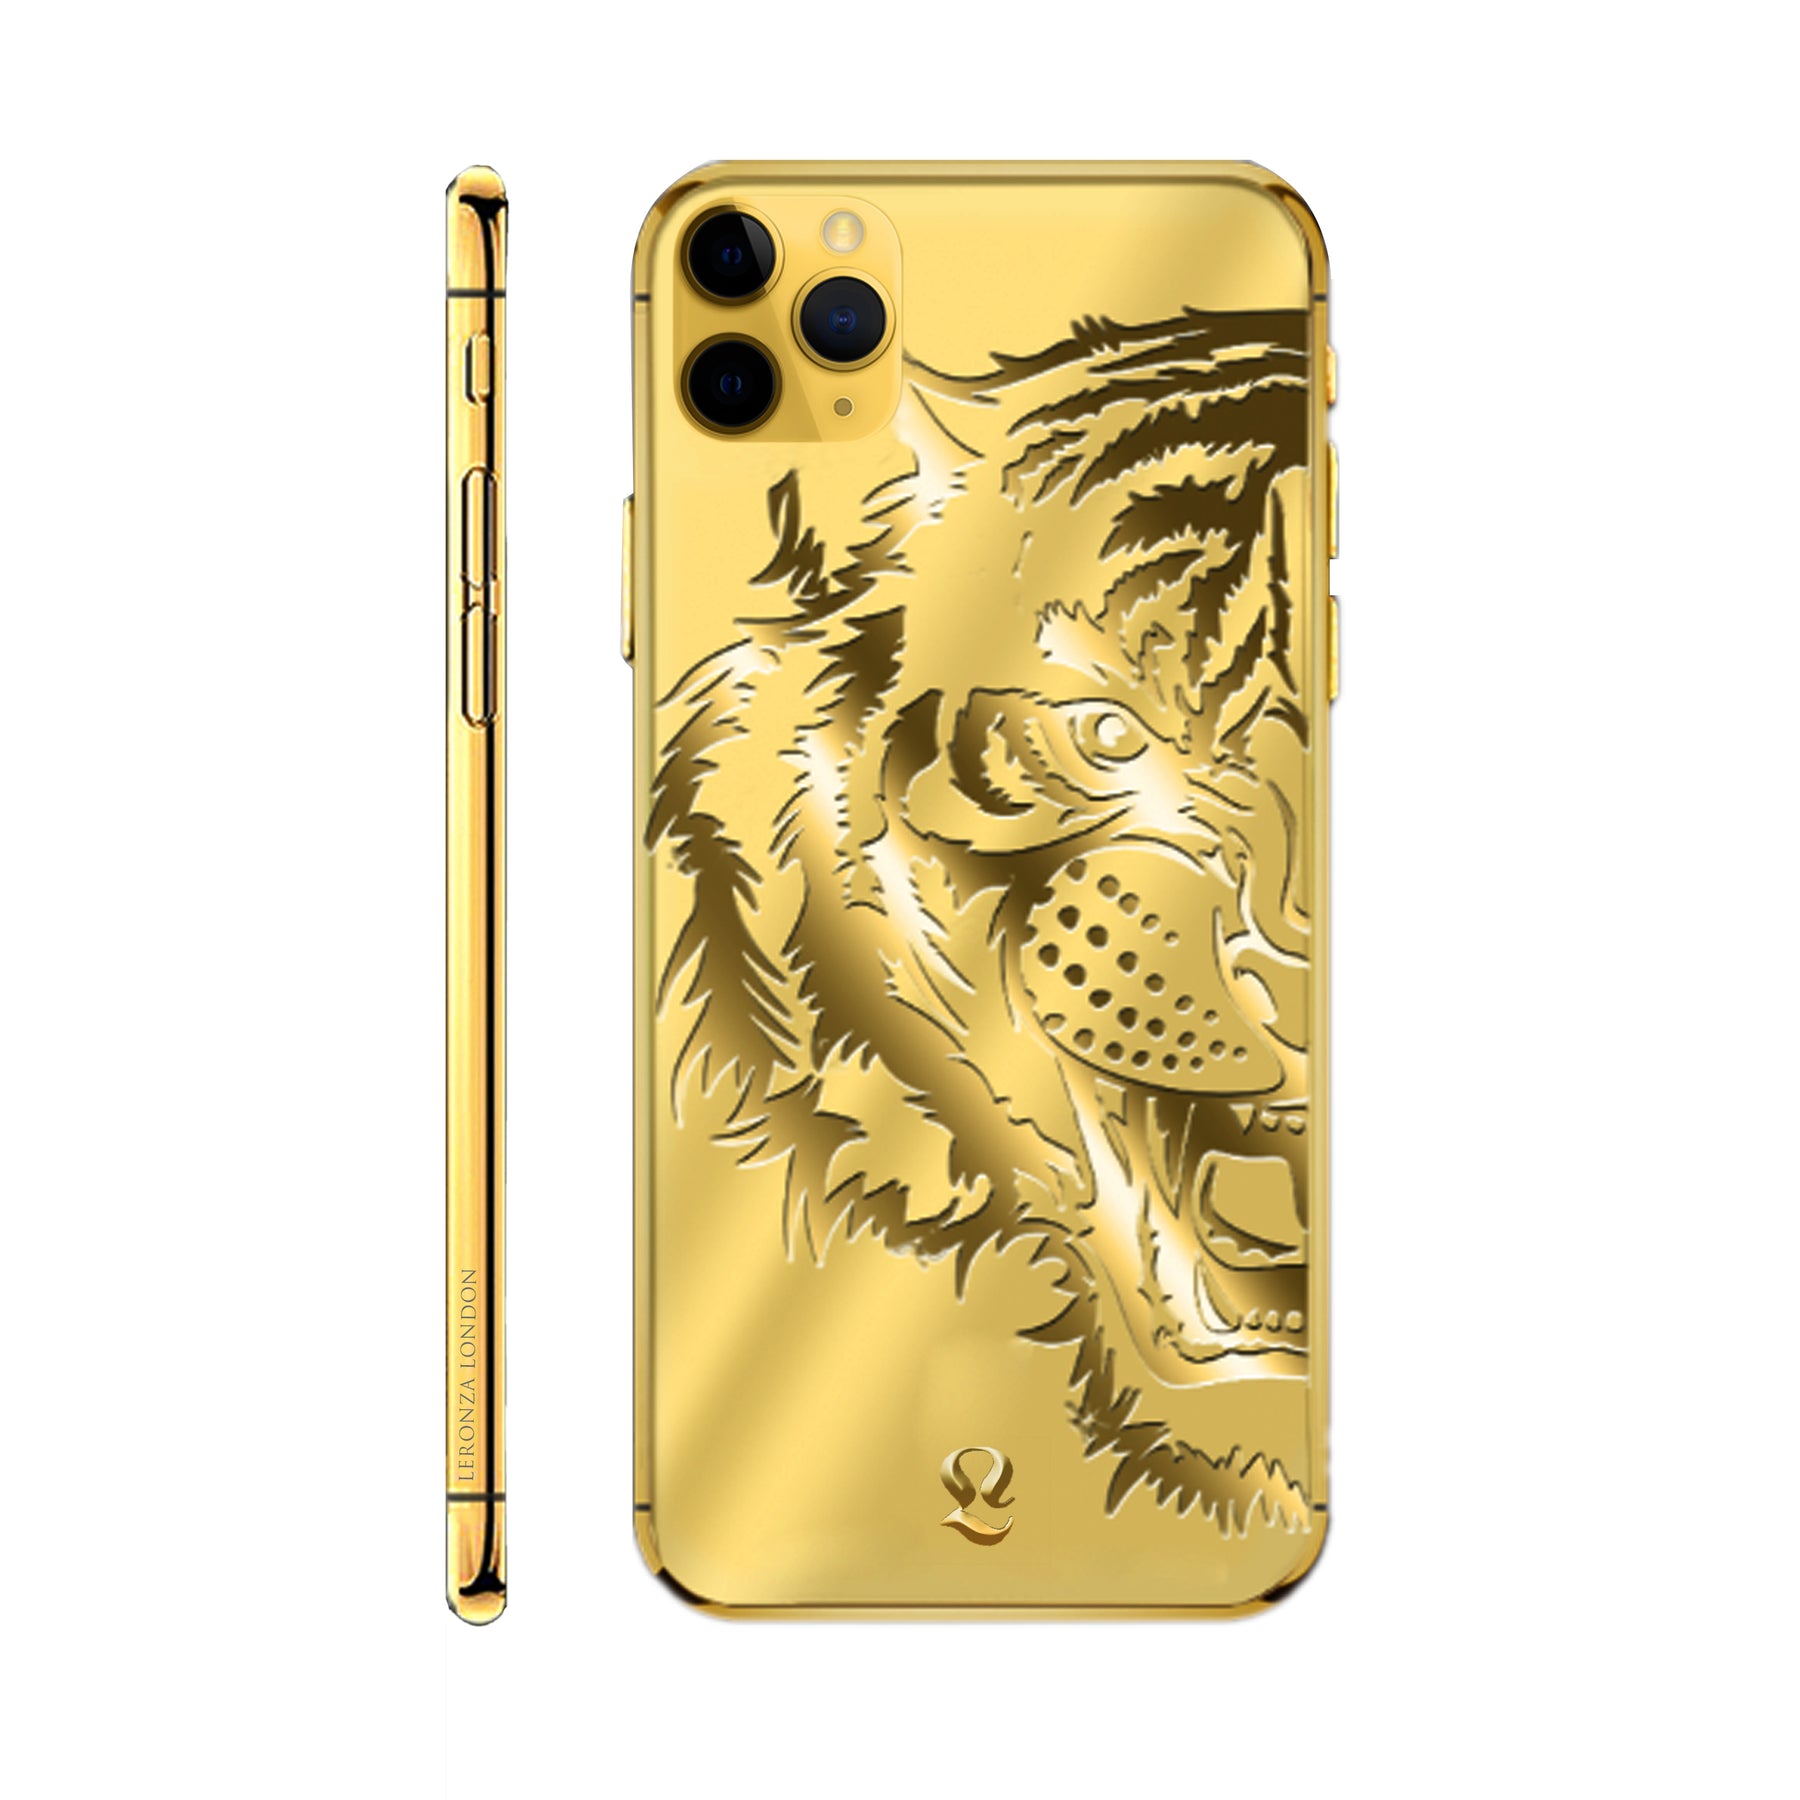 Seanreek Iphone 11 Pro Gold Limited Edition